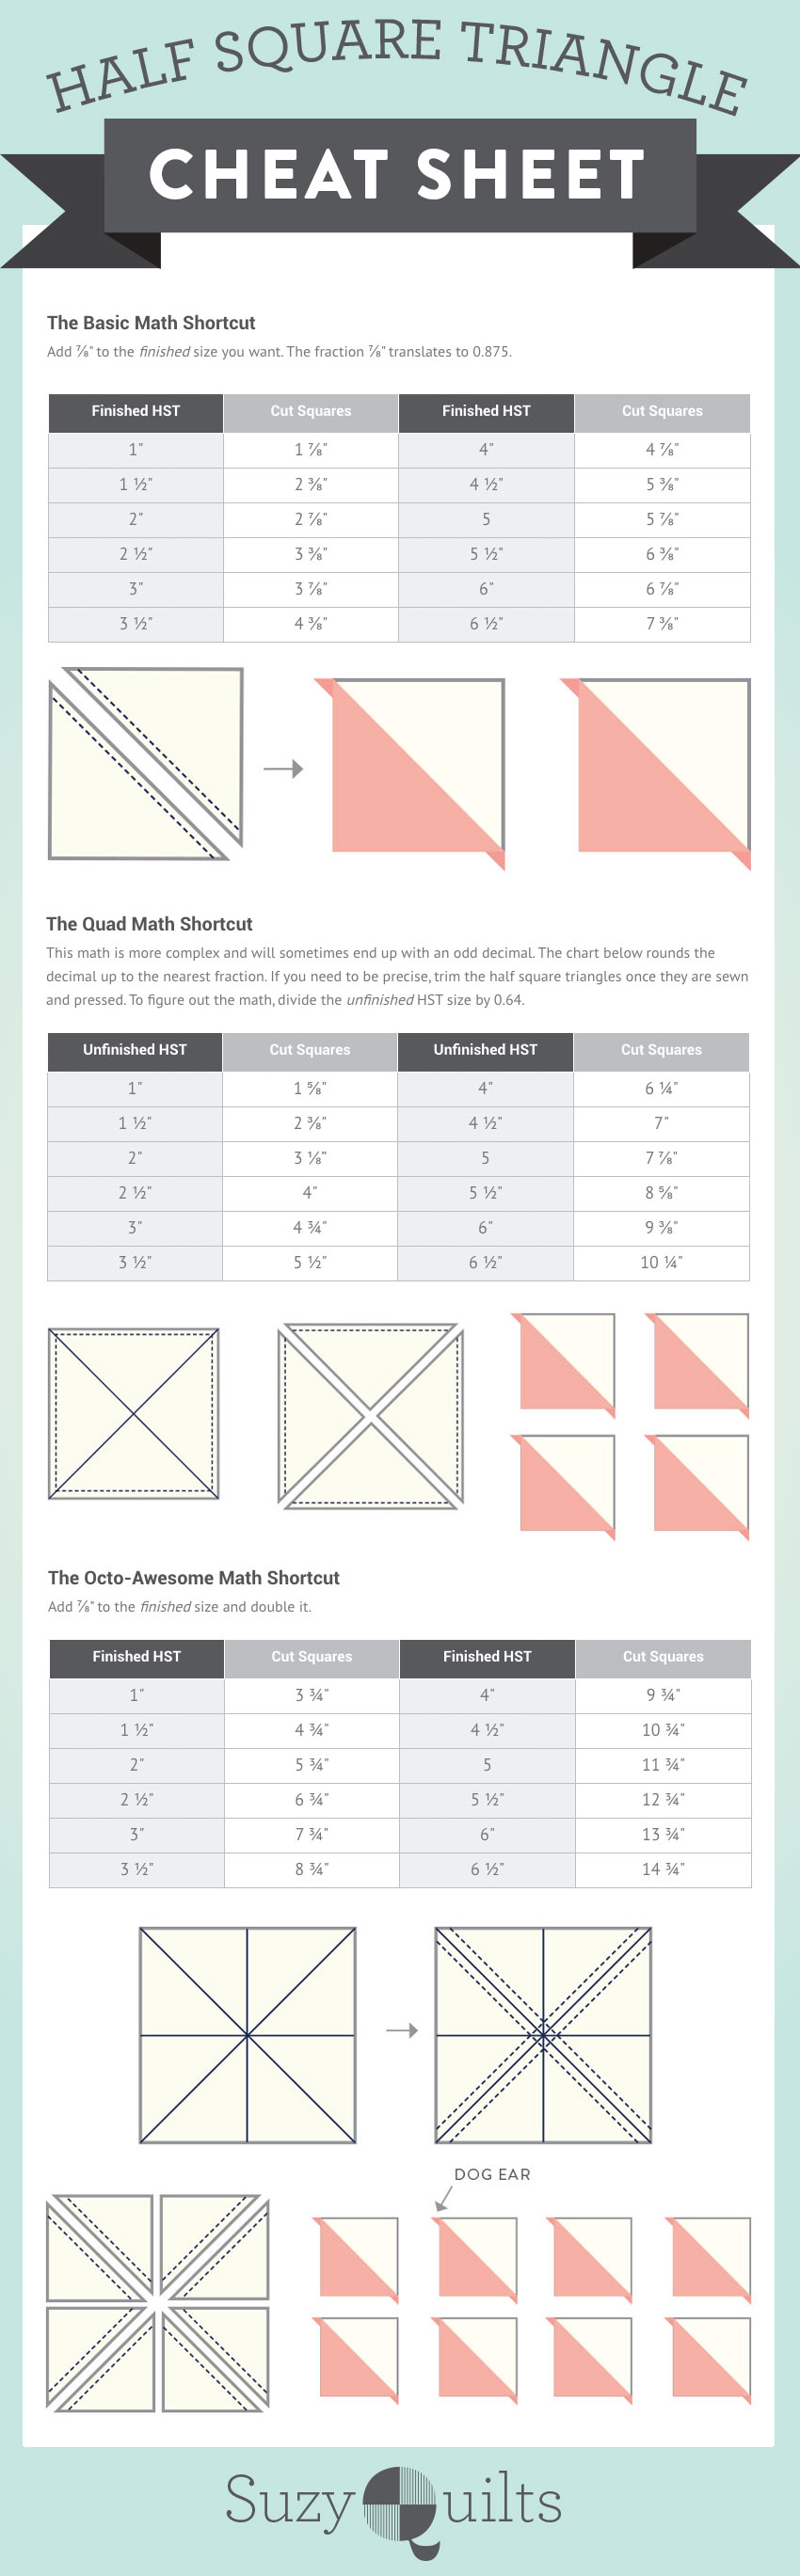 Included in this post is a video demonstration, HST conversion chart to give you the math to make all block sizes, and sewing techniques to sew 2, 4 or 8 half square triangles at a time | Suzy Quilts - https://suzyquilts.com/half-square-triangles-tutorial 